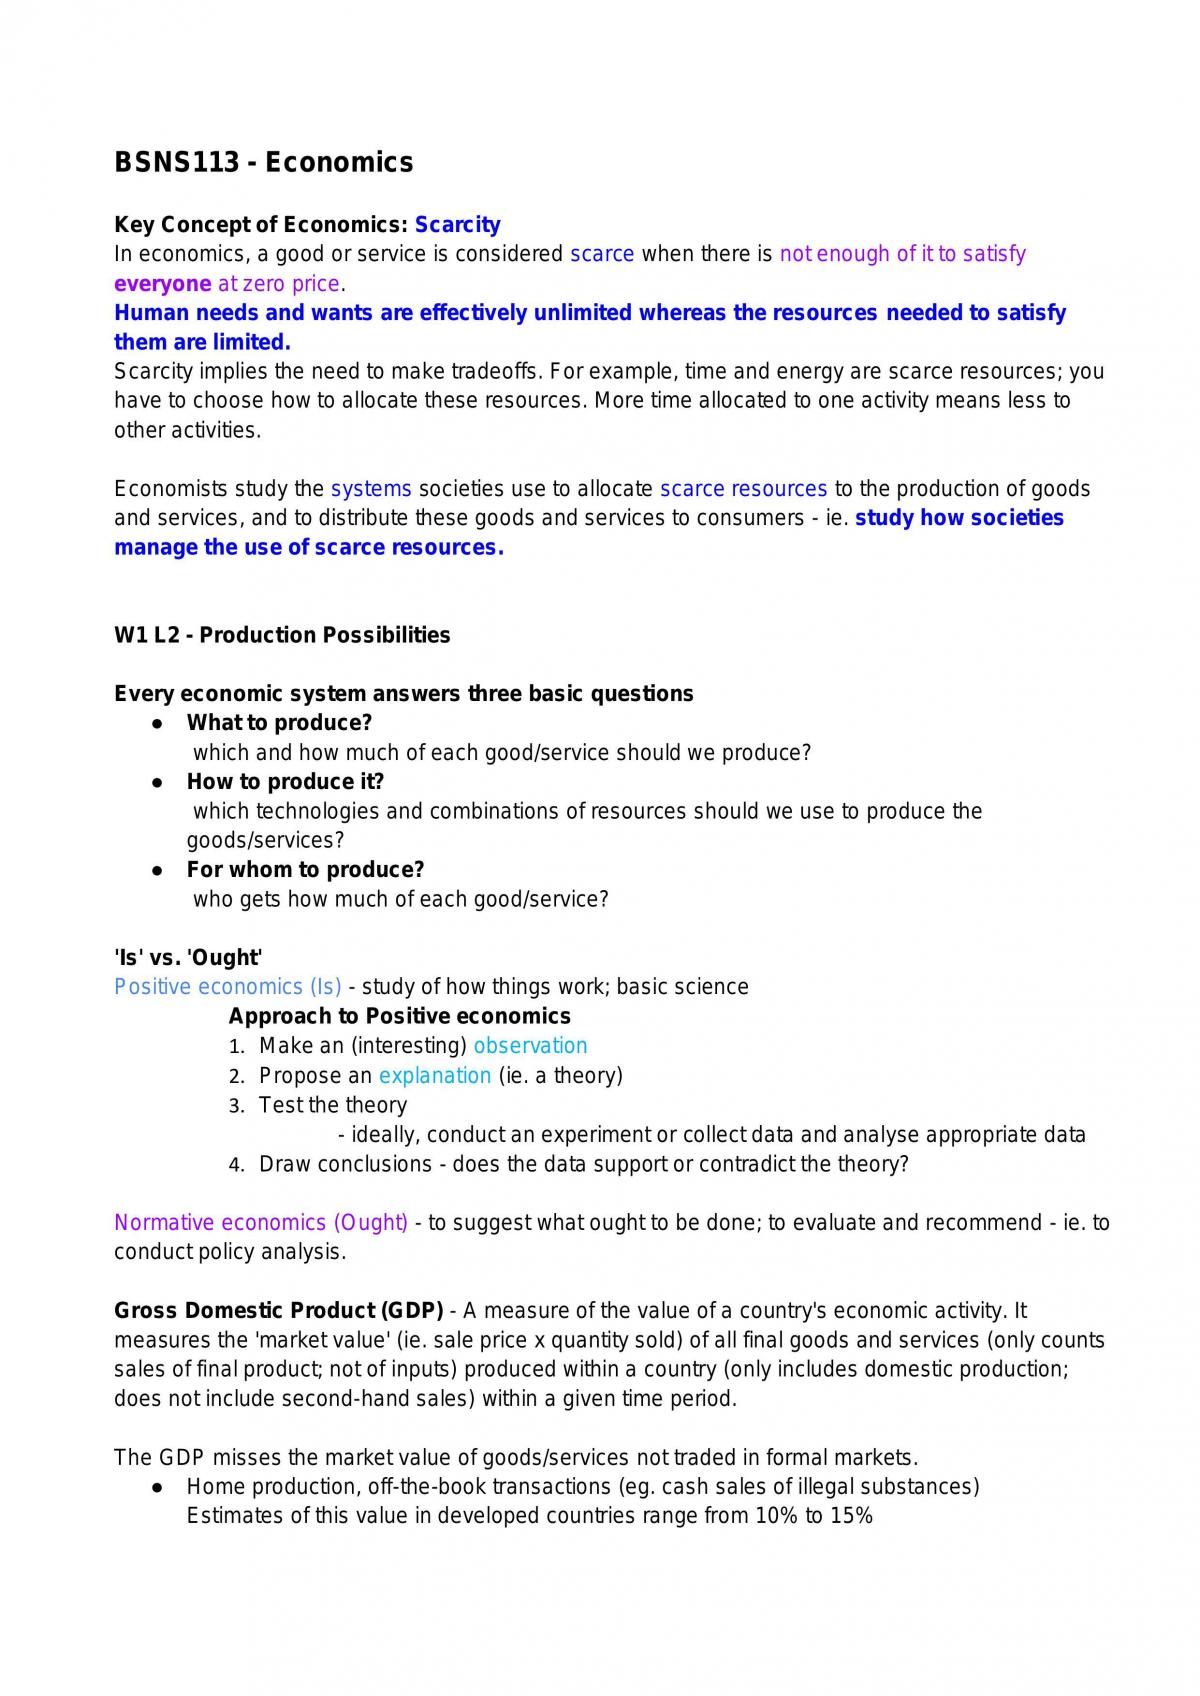 Economic Principles and Policy Full Lecture Notes - Page 1